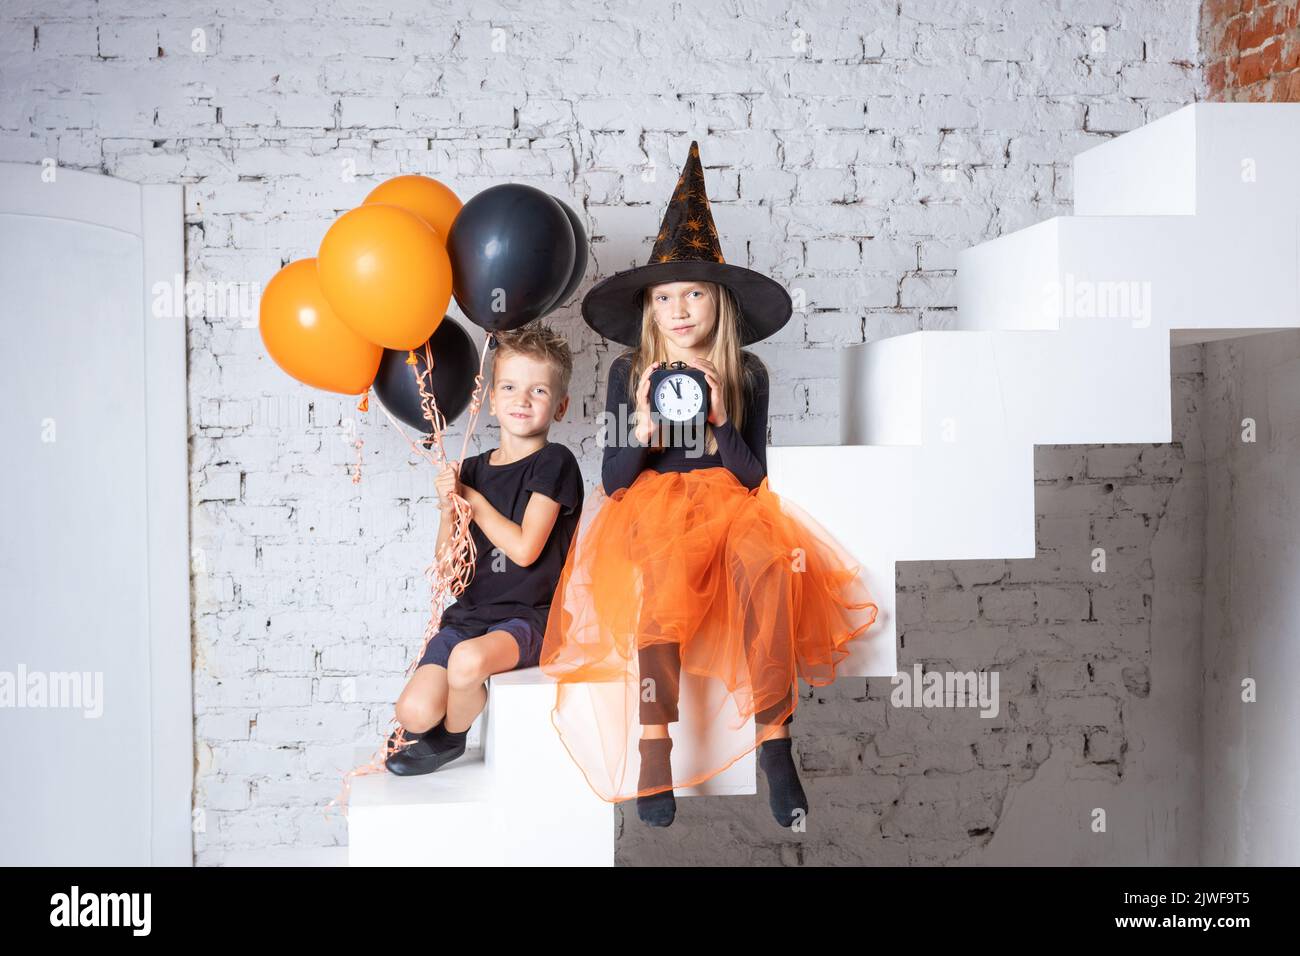 Halloween time. Children in creepy witch costumes and hats are holding a black alarm clock and black and orange balloons while sitting on the stairs. Stock Photo